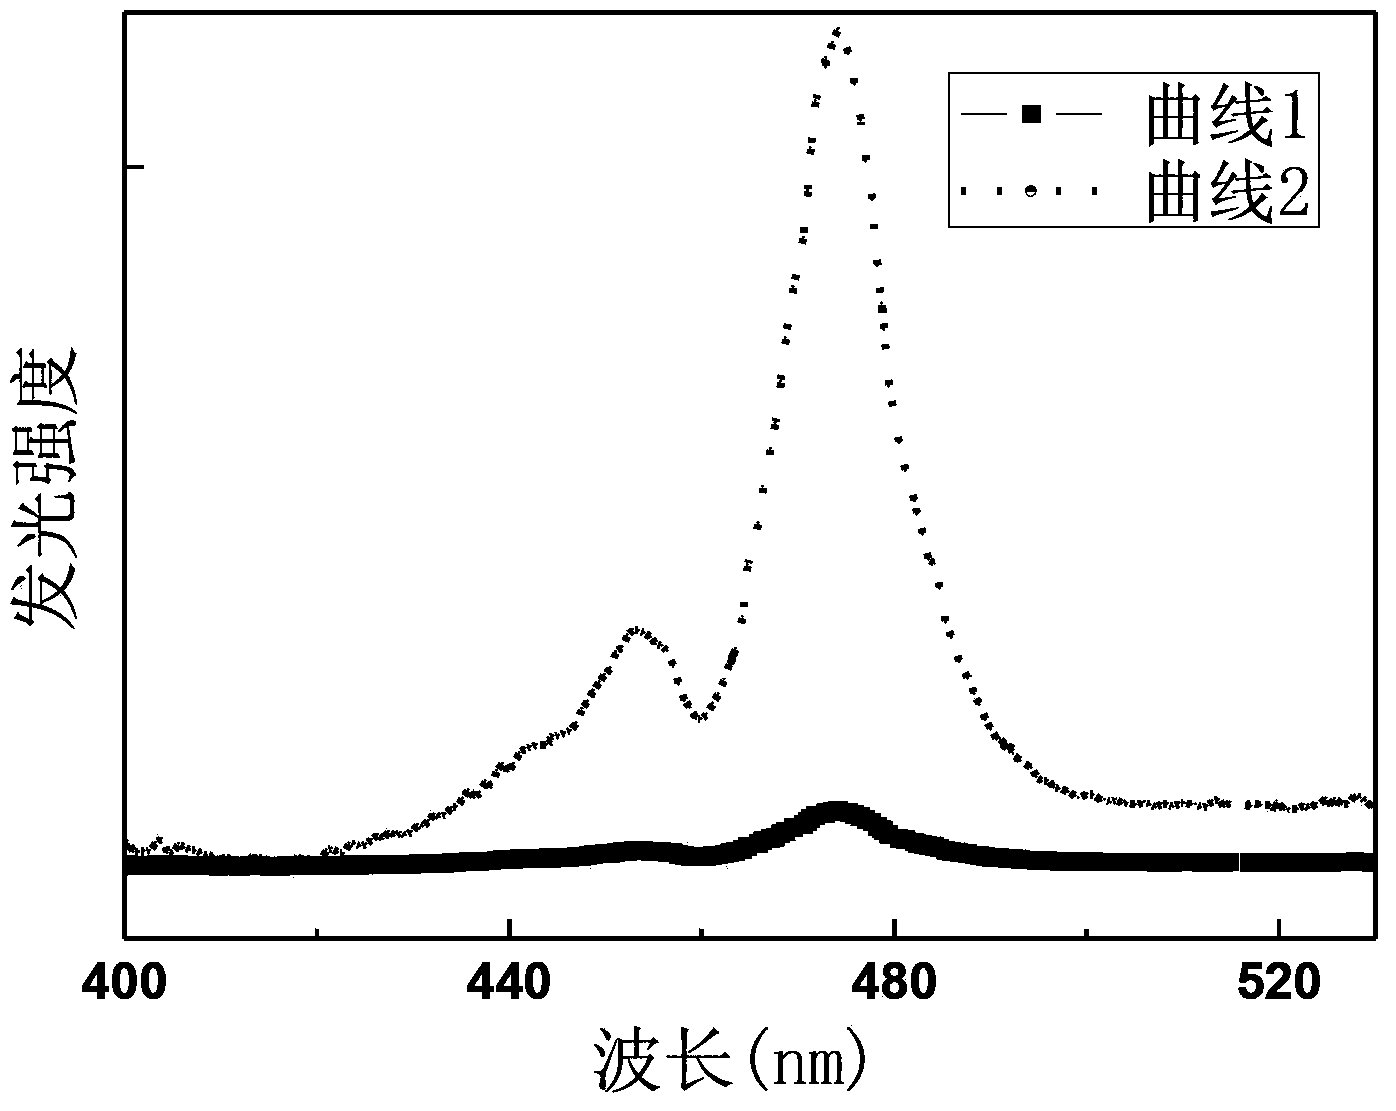 Thulium-holmium-codoped zirconium dioxide glass up-conversion luminescence material, and preparation method and application thereof